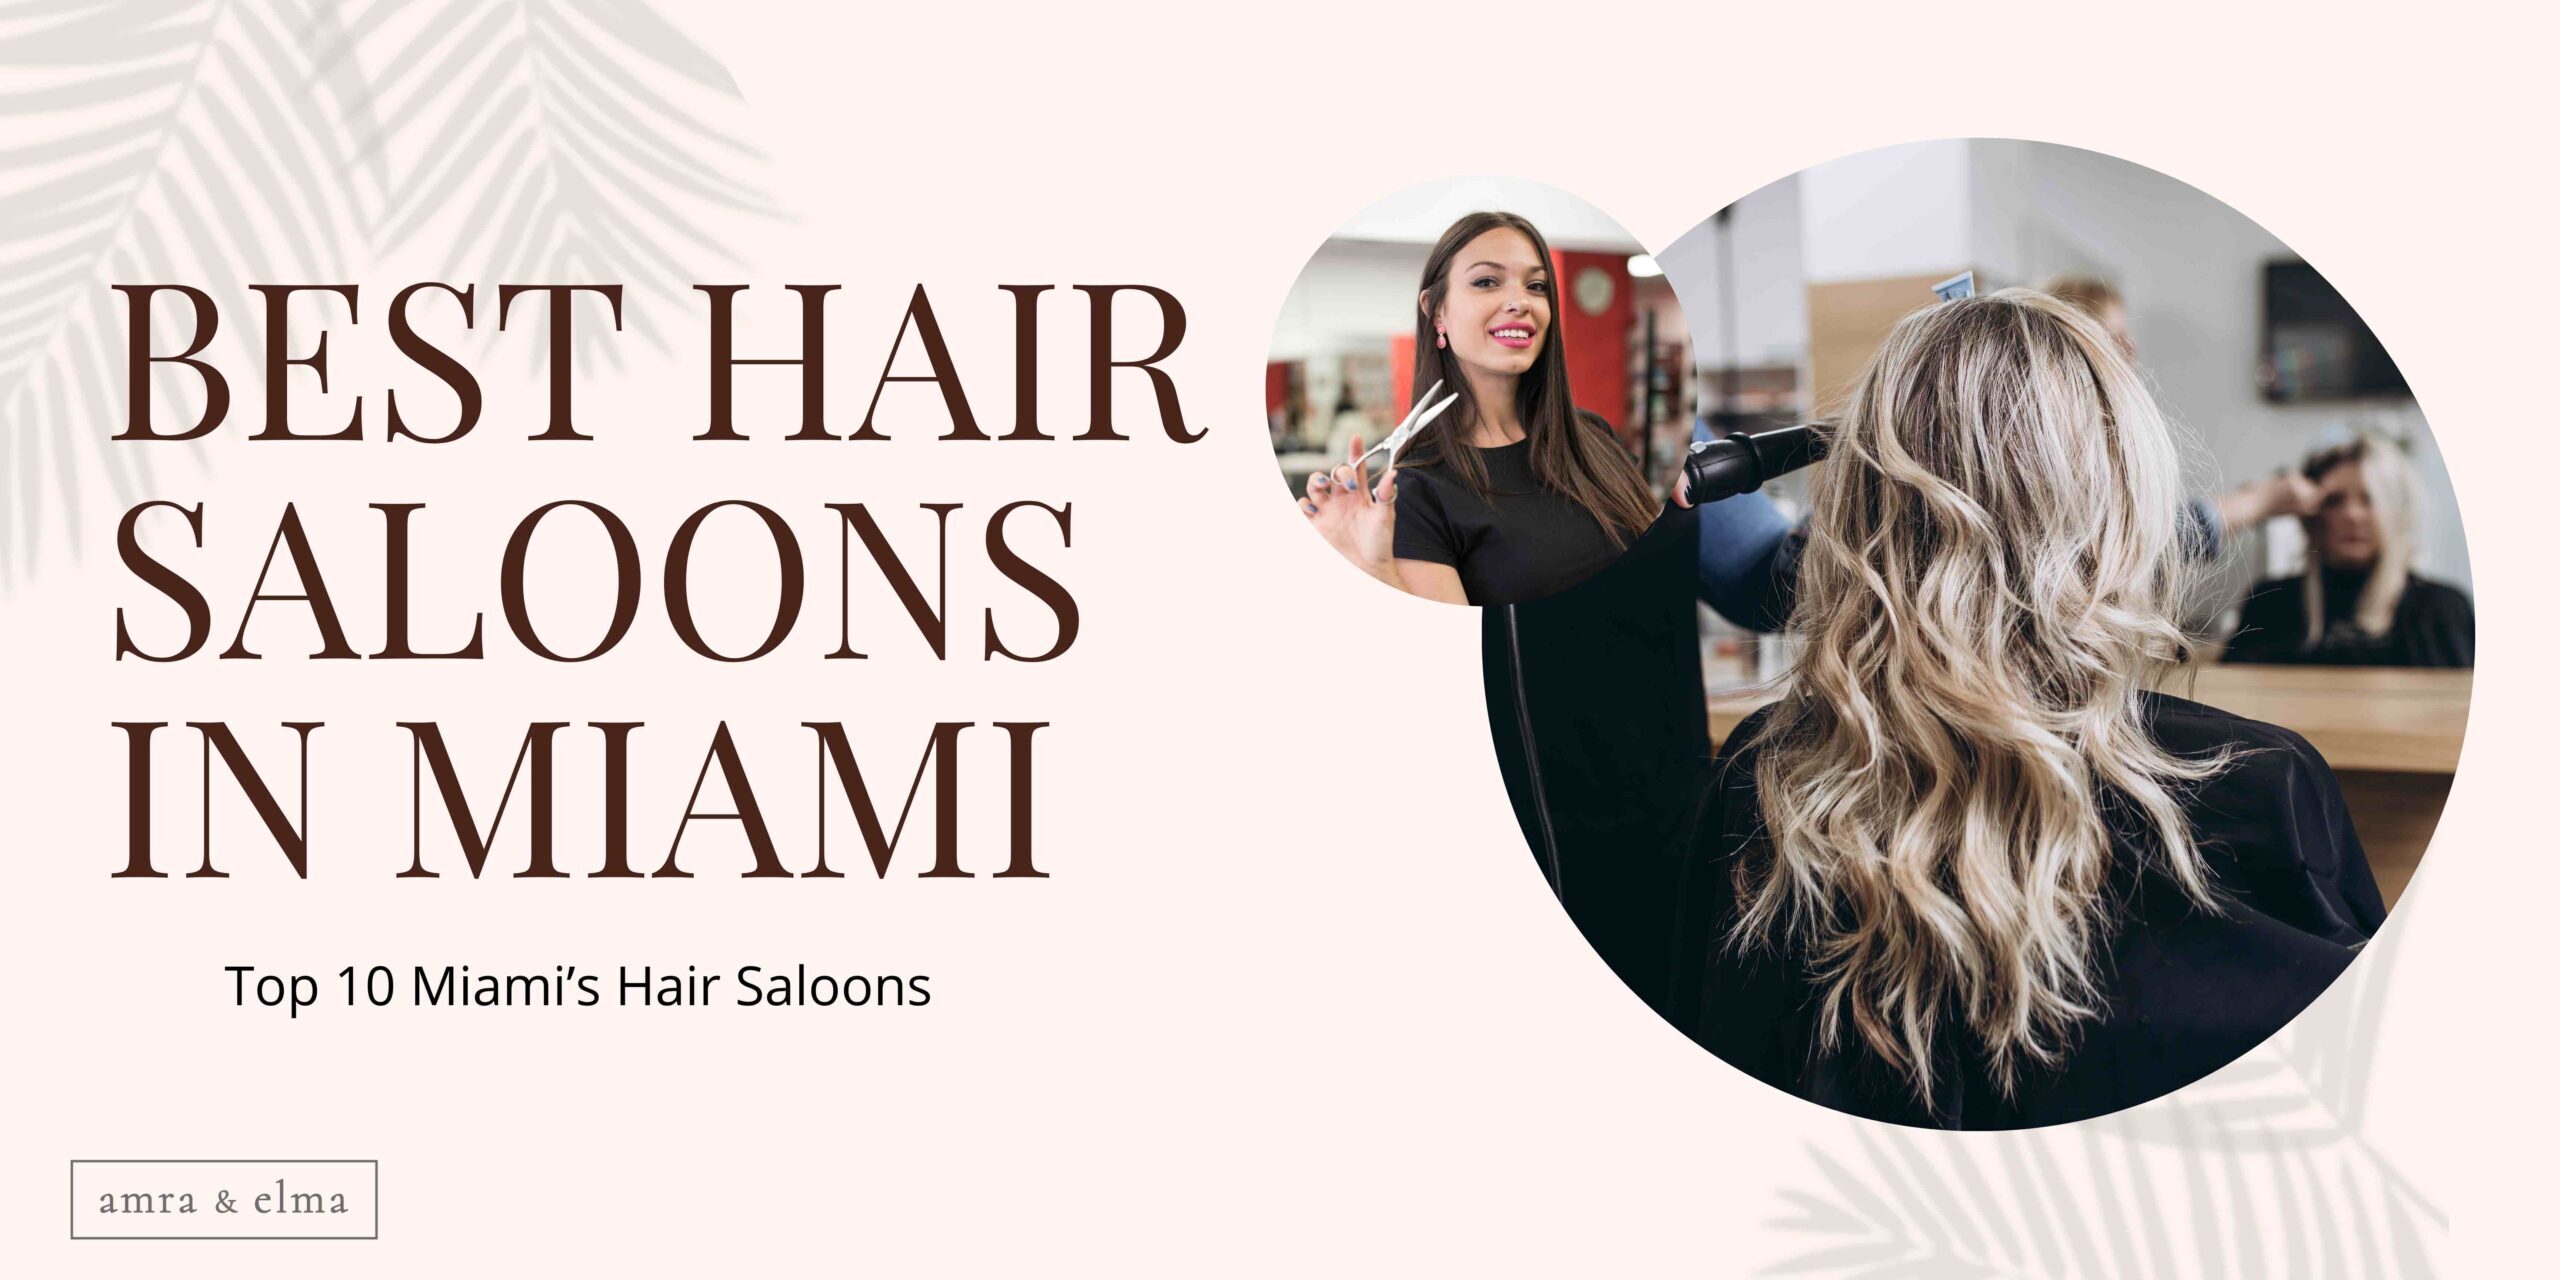 Best Hair Saloons in Miami scaled